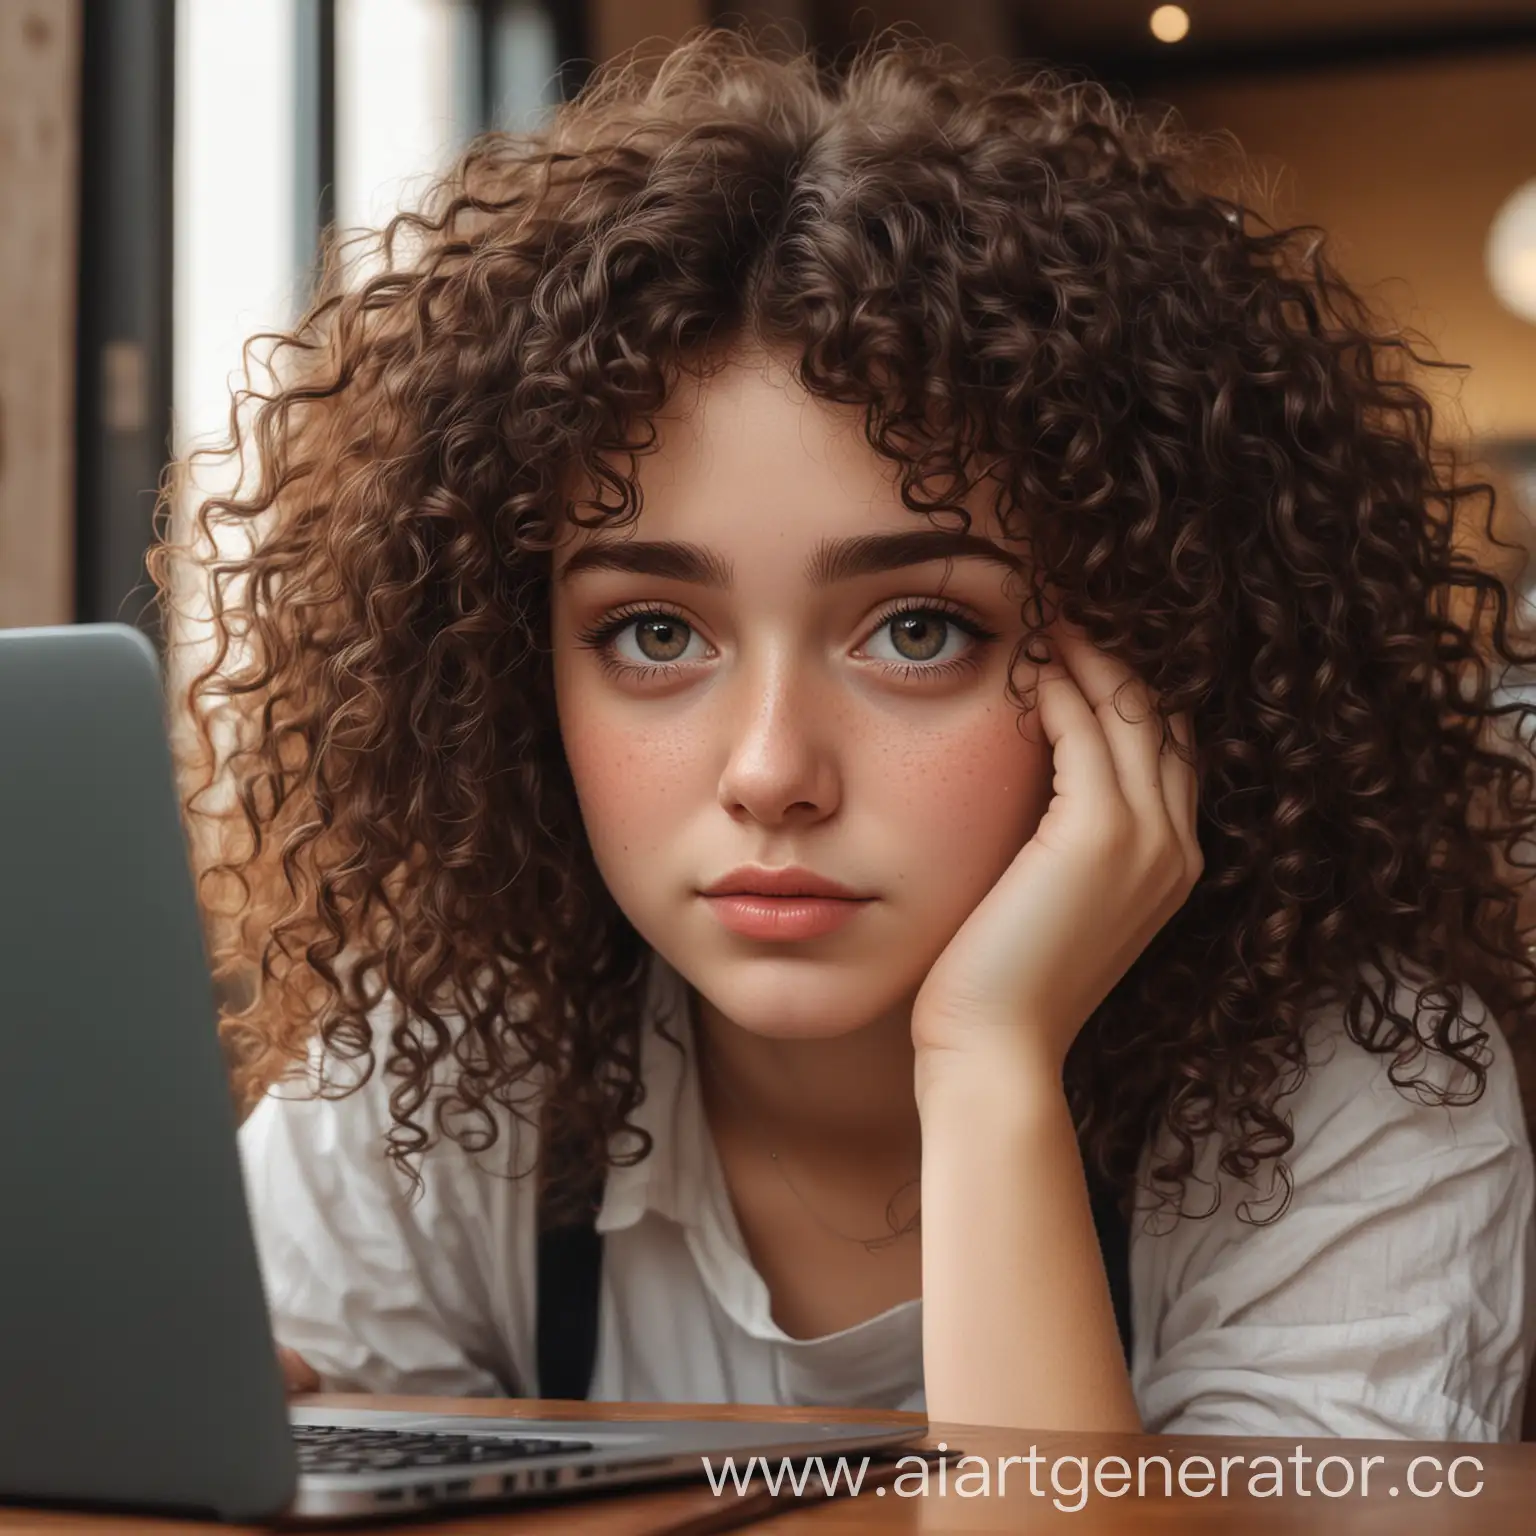 Emotional-Girl-with-Curly-Hair-at-Cafe-Laptop